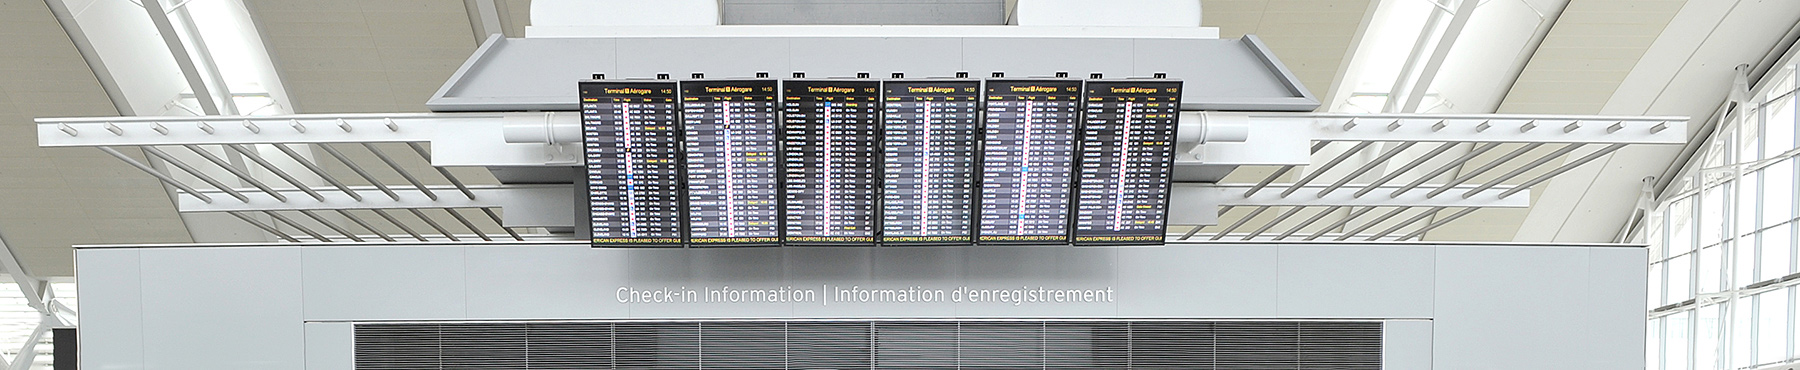 Air Canada Check-In Information